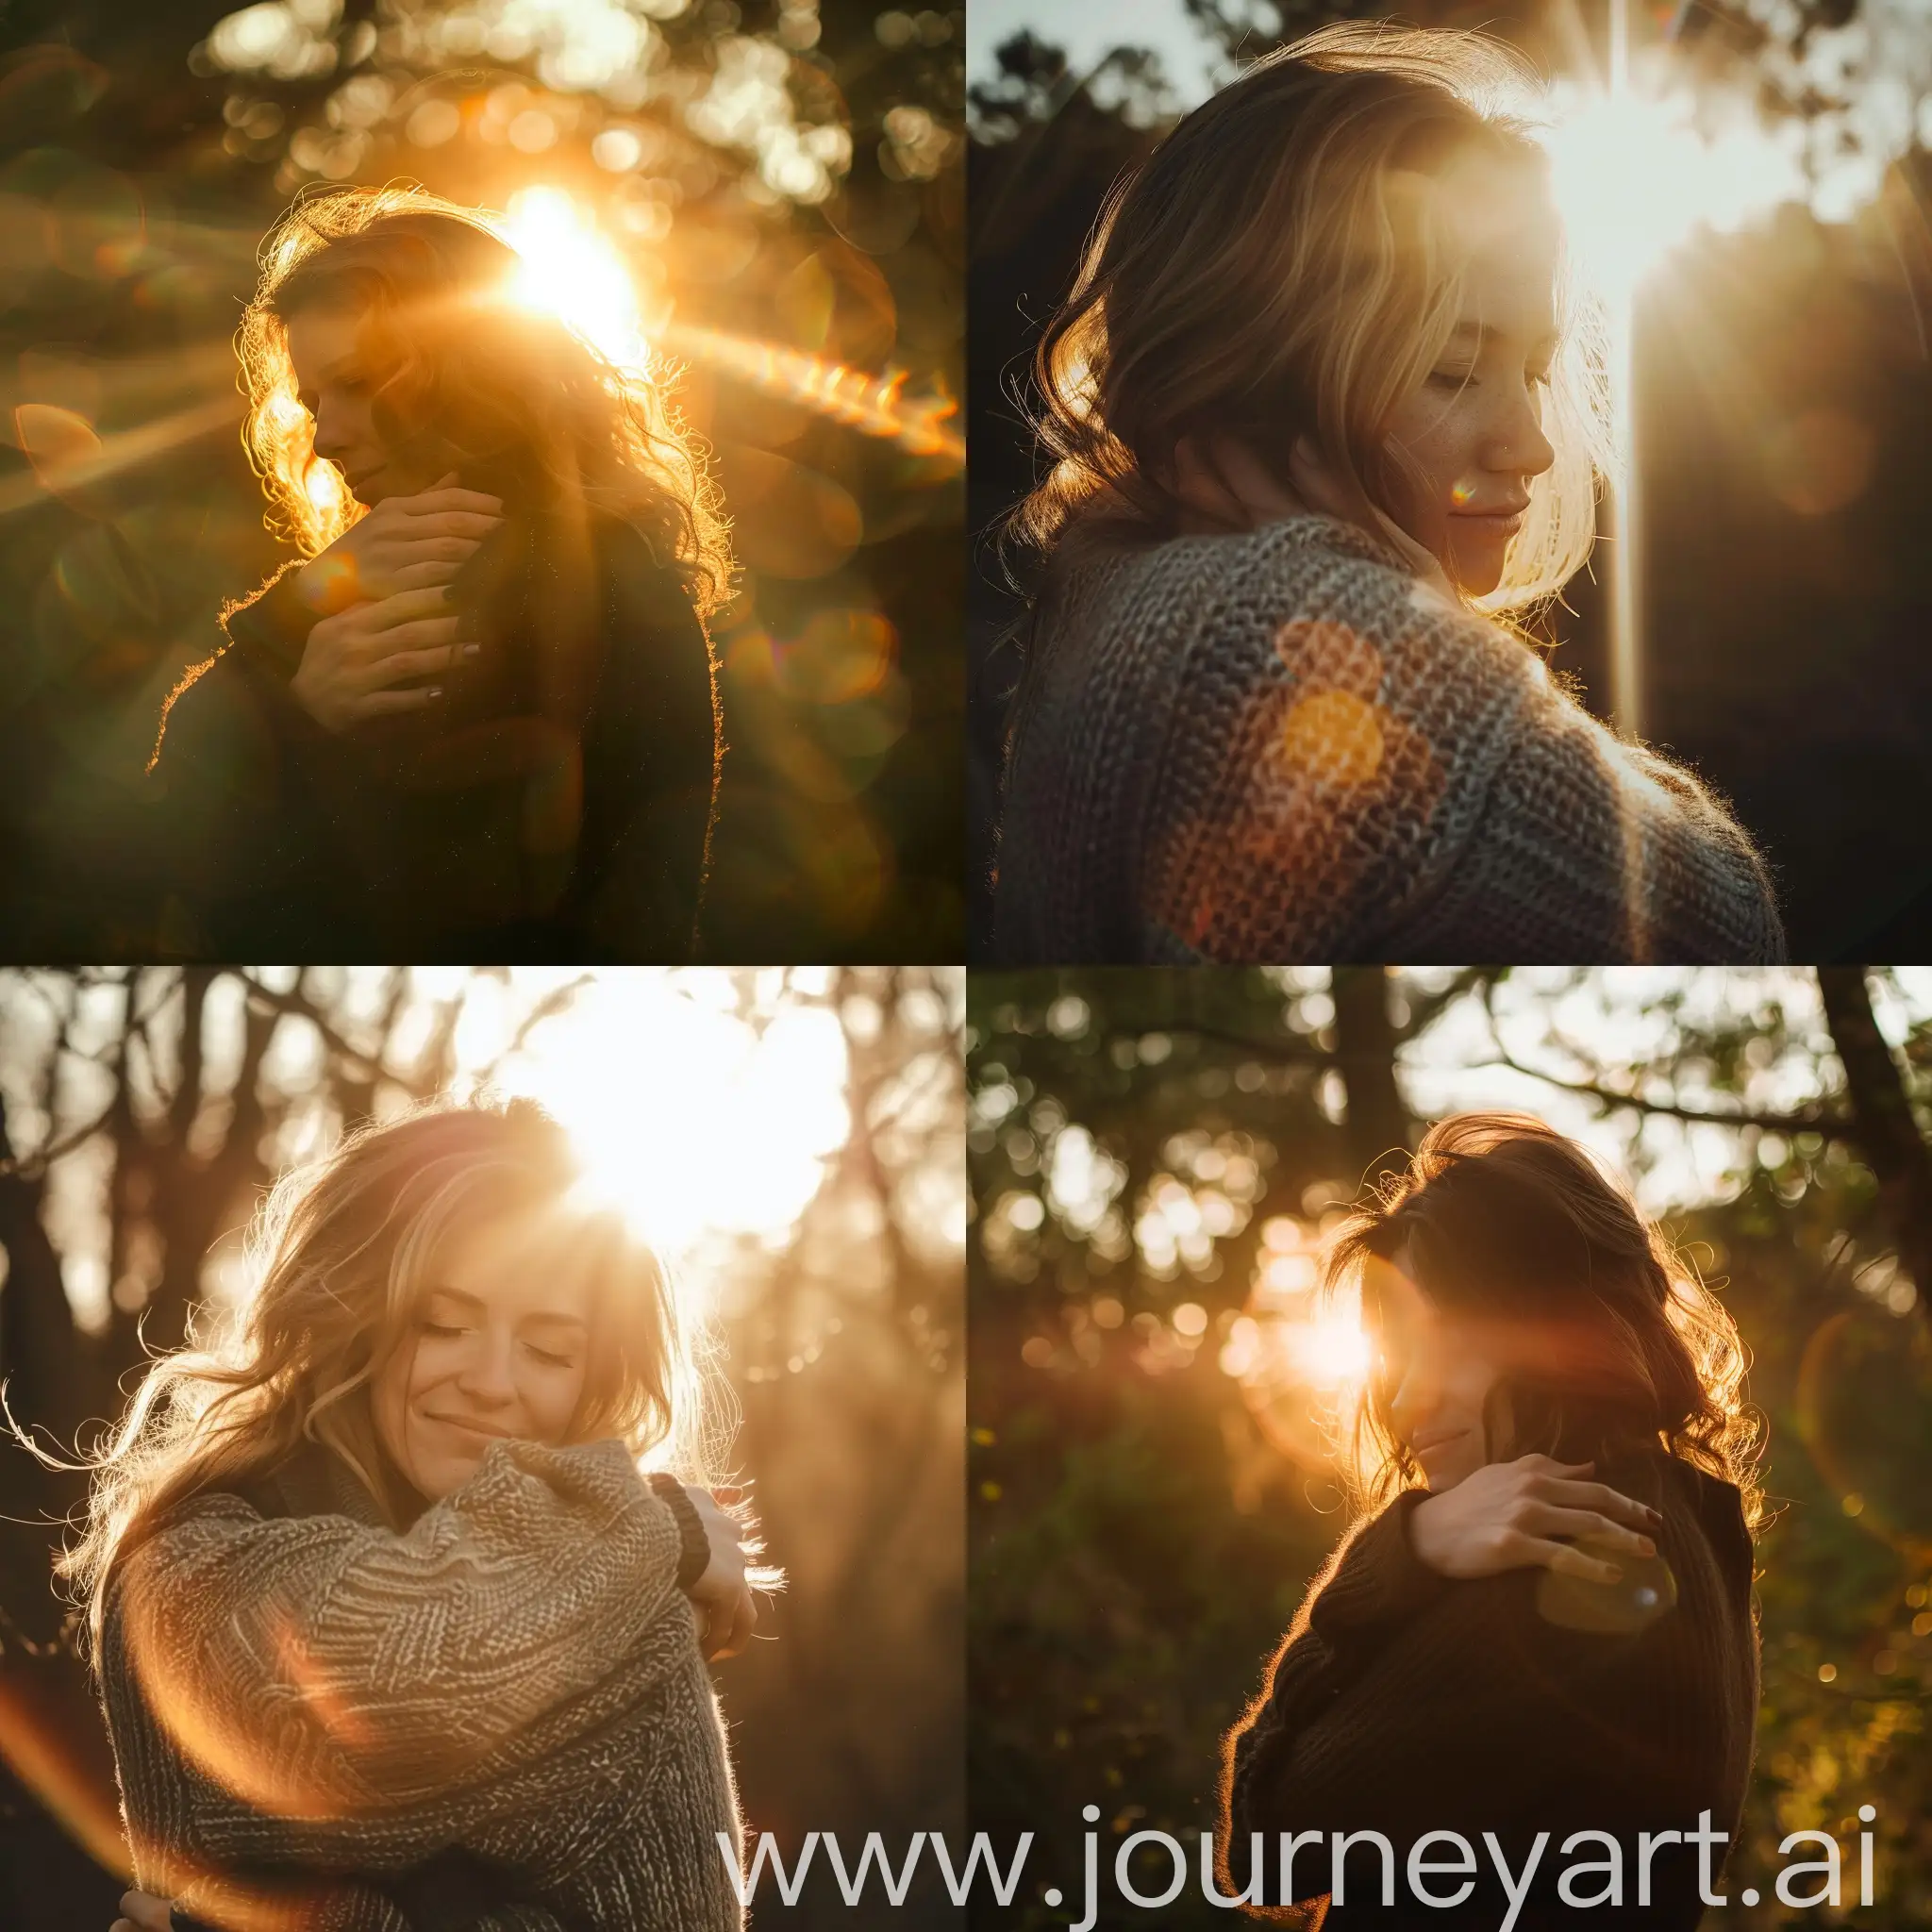 Radiant-Woman-Embraced-by-Sunlight-in-a-Tranquil-Scene